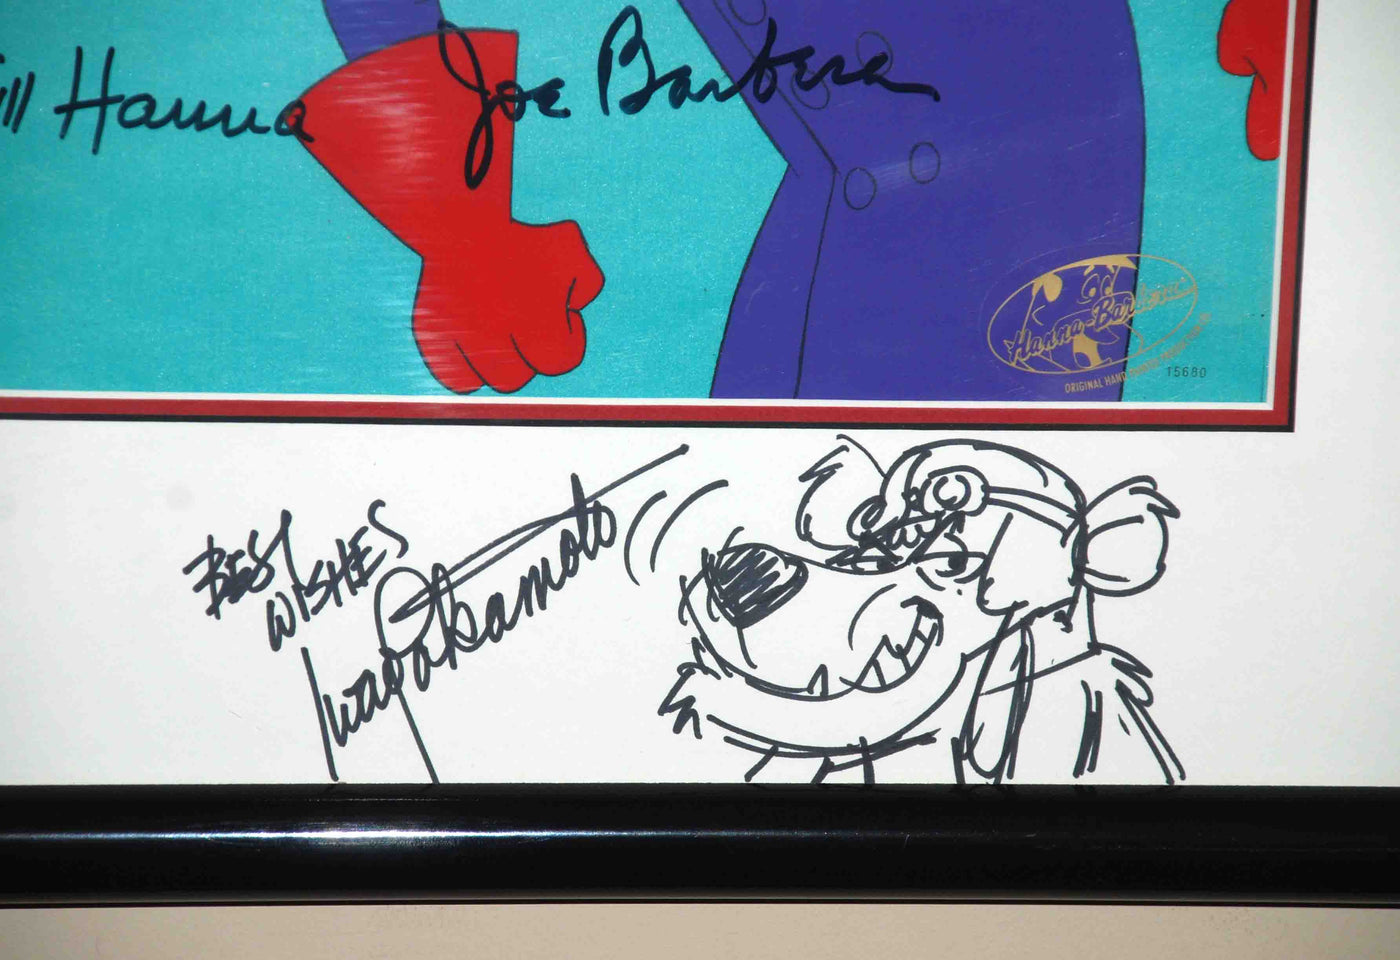 Hanna Barbera Production Cel from Fender Bender featuring Dick Dasterdly, Signed by Hanna, Barbera, Takamoto